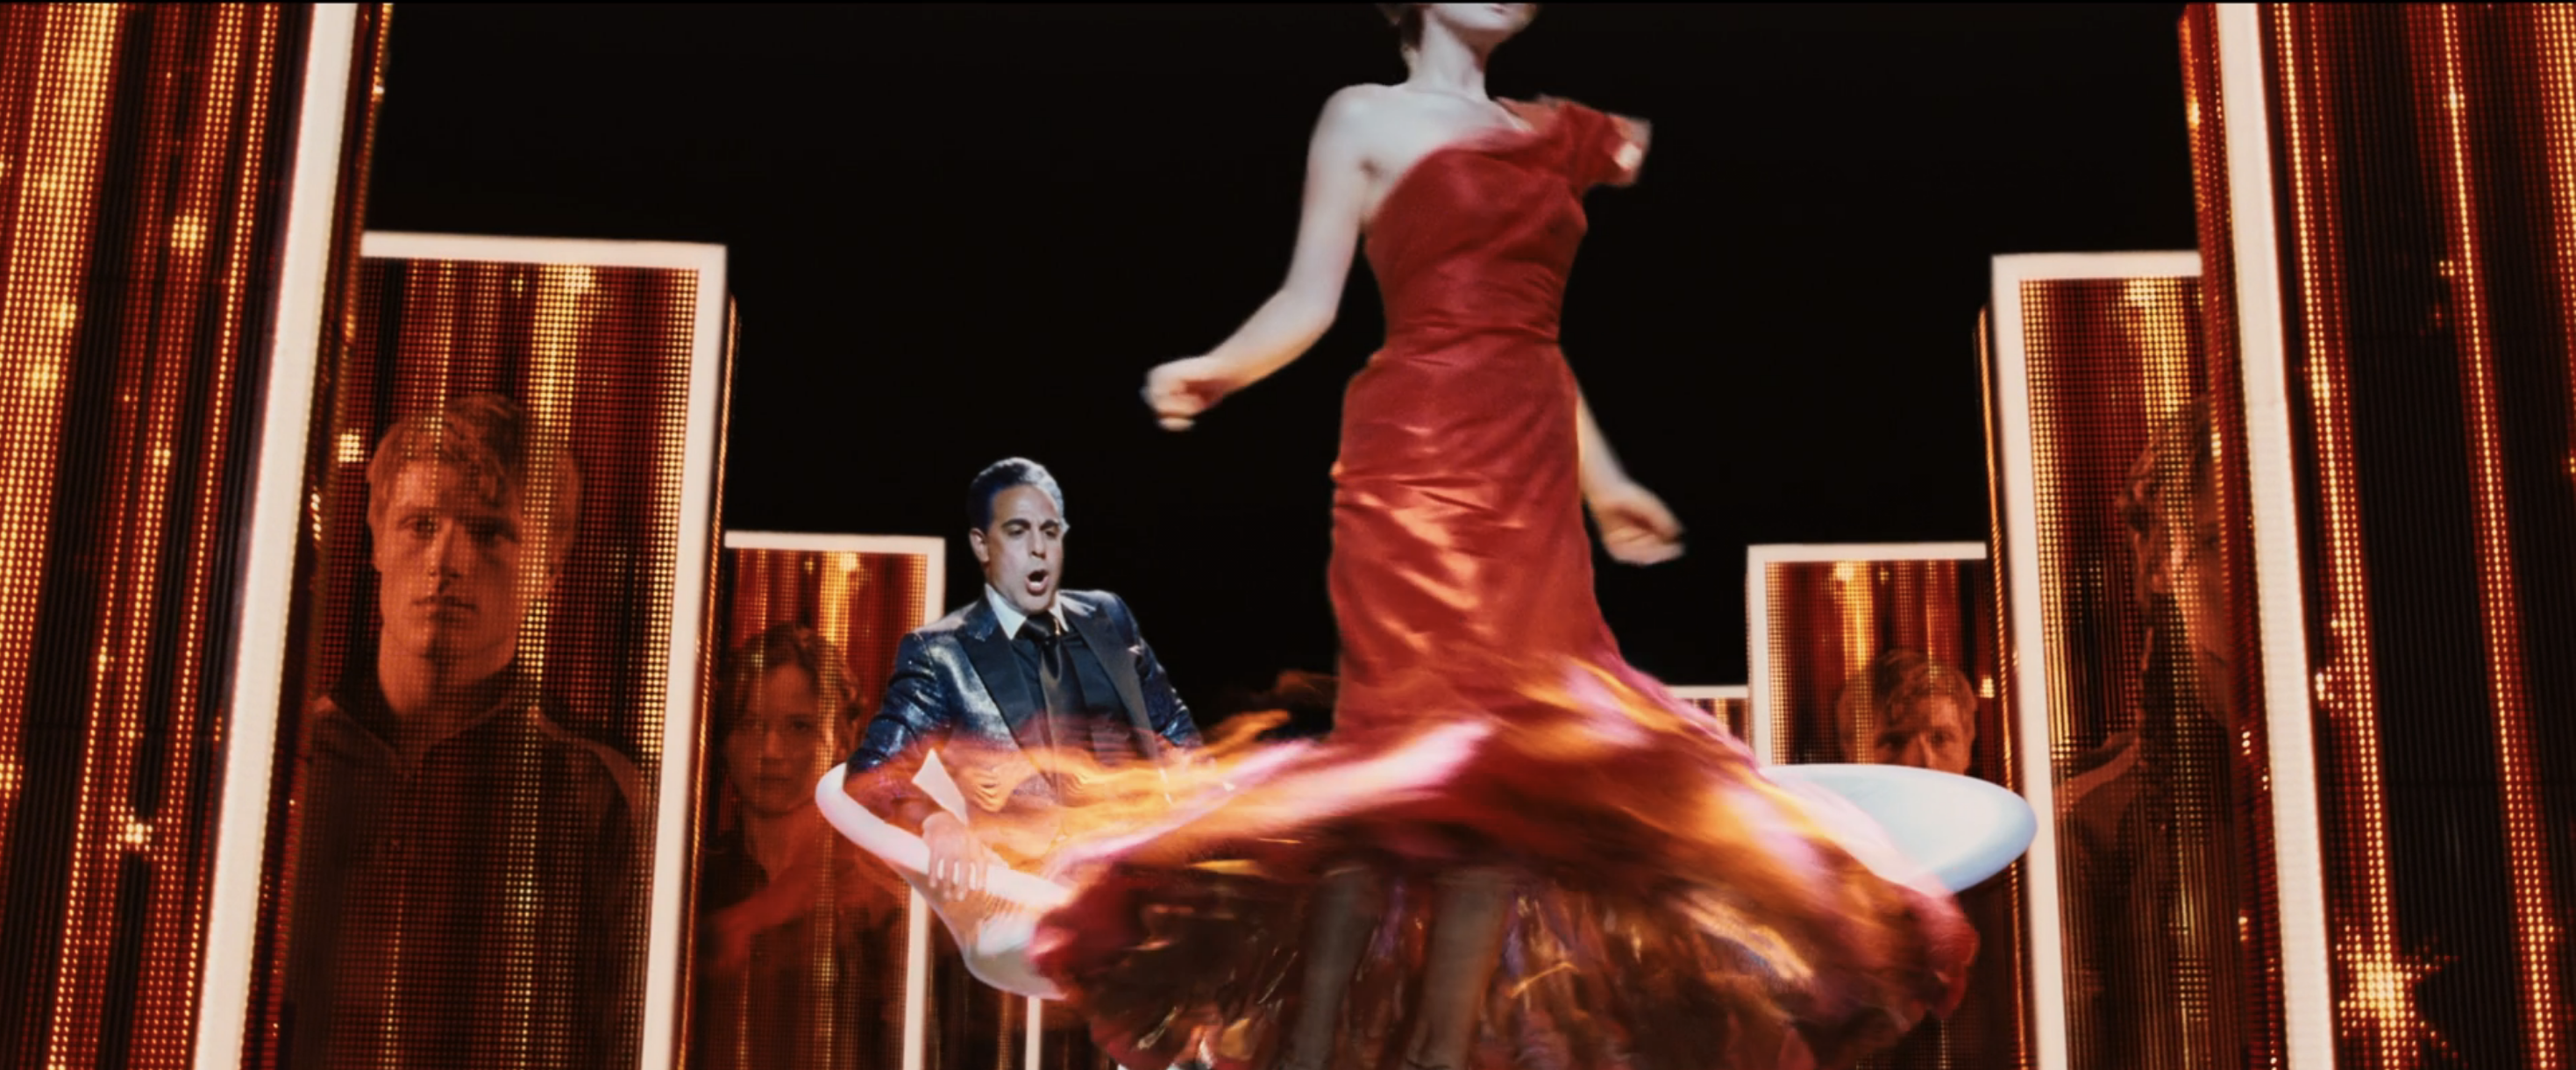 Katniss spins on her stage, the skirt of her dress catching fire